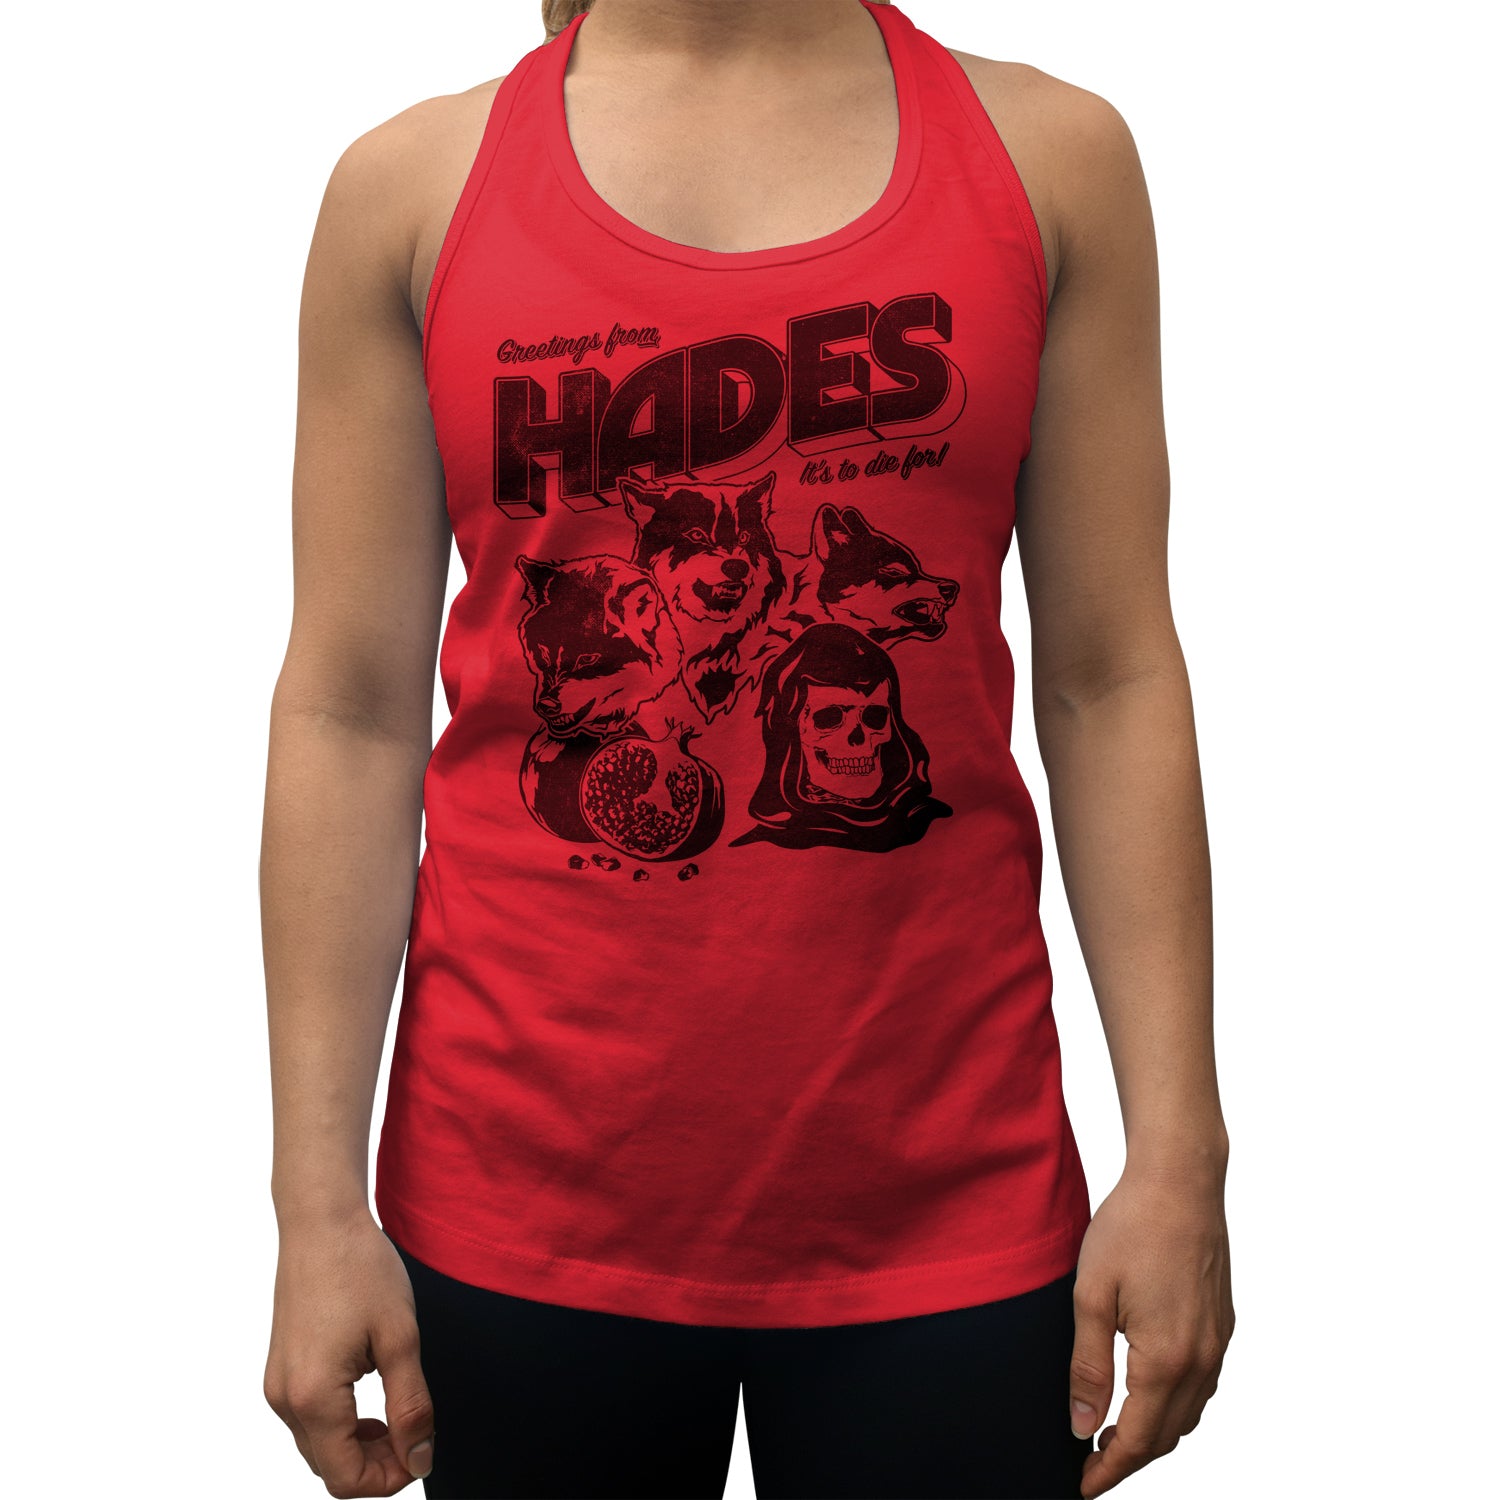 Women's Greetings from Hades Racerback Tank Top